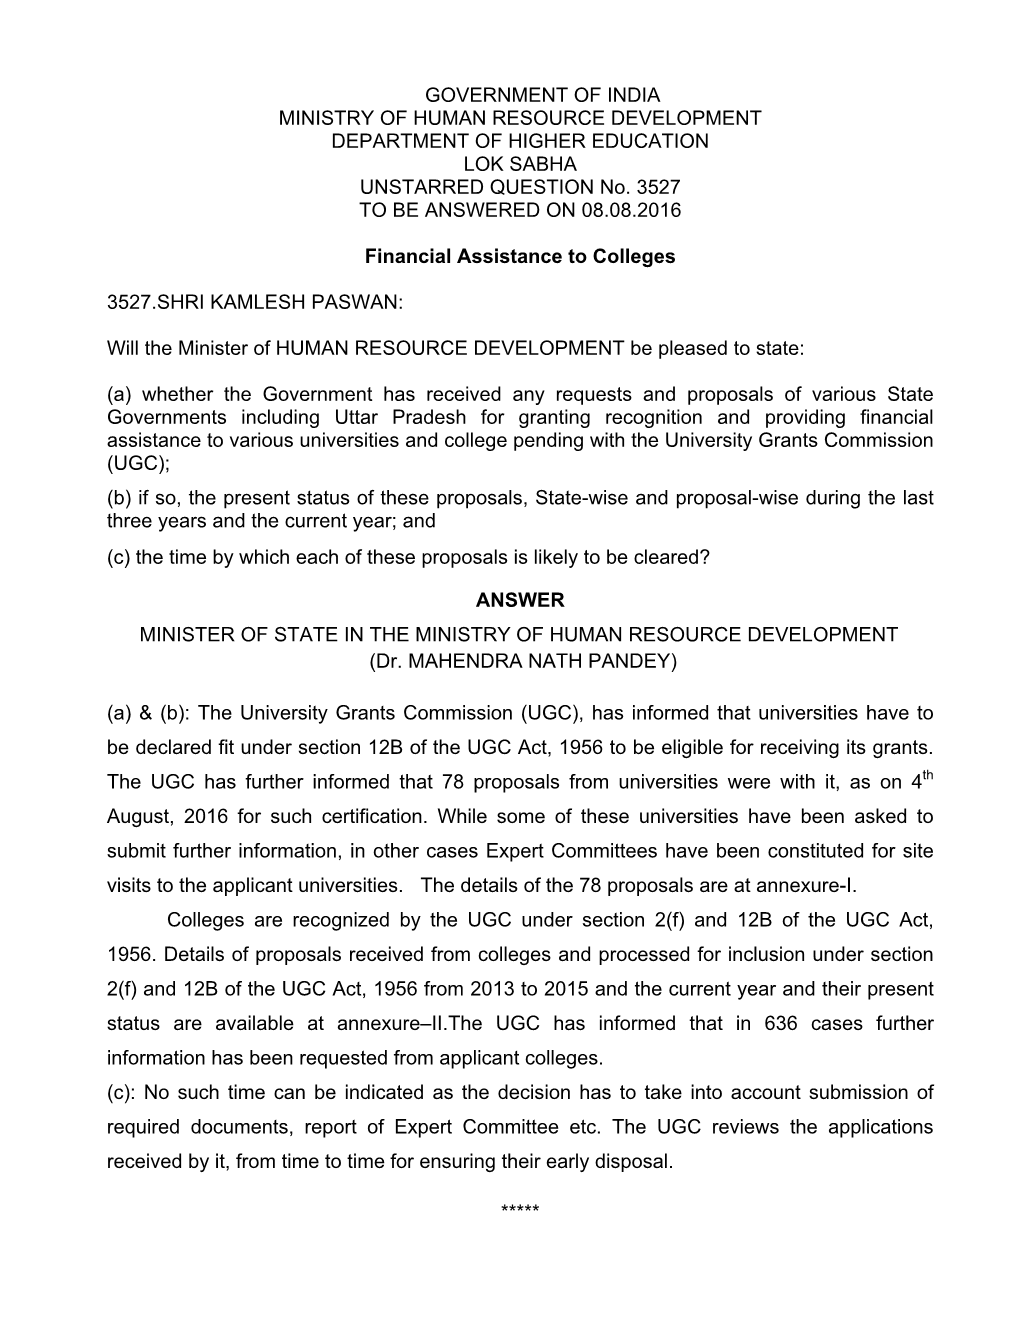 GOVERNMENT of INDIA MINISTRY of HUMAN RESOURCE DEVELOPMENT DEPARTMENT of HIGHER EDUCATION LOK SABHA UNSTARRED QUESTION No